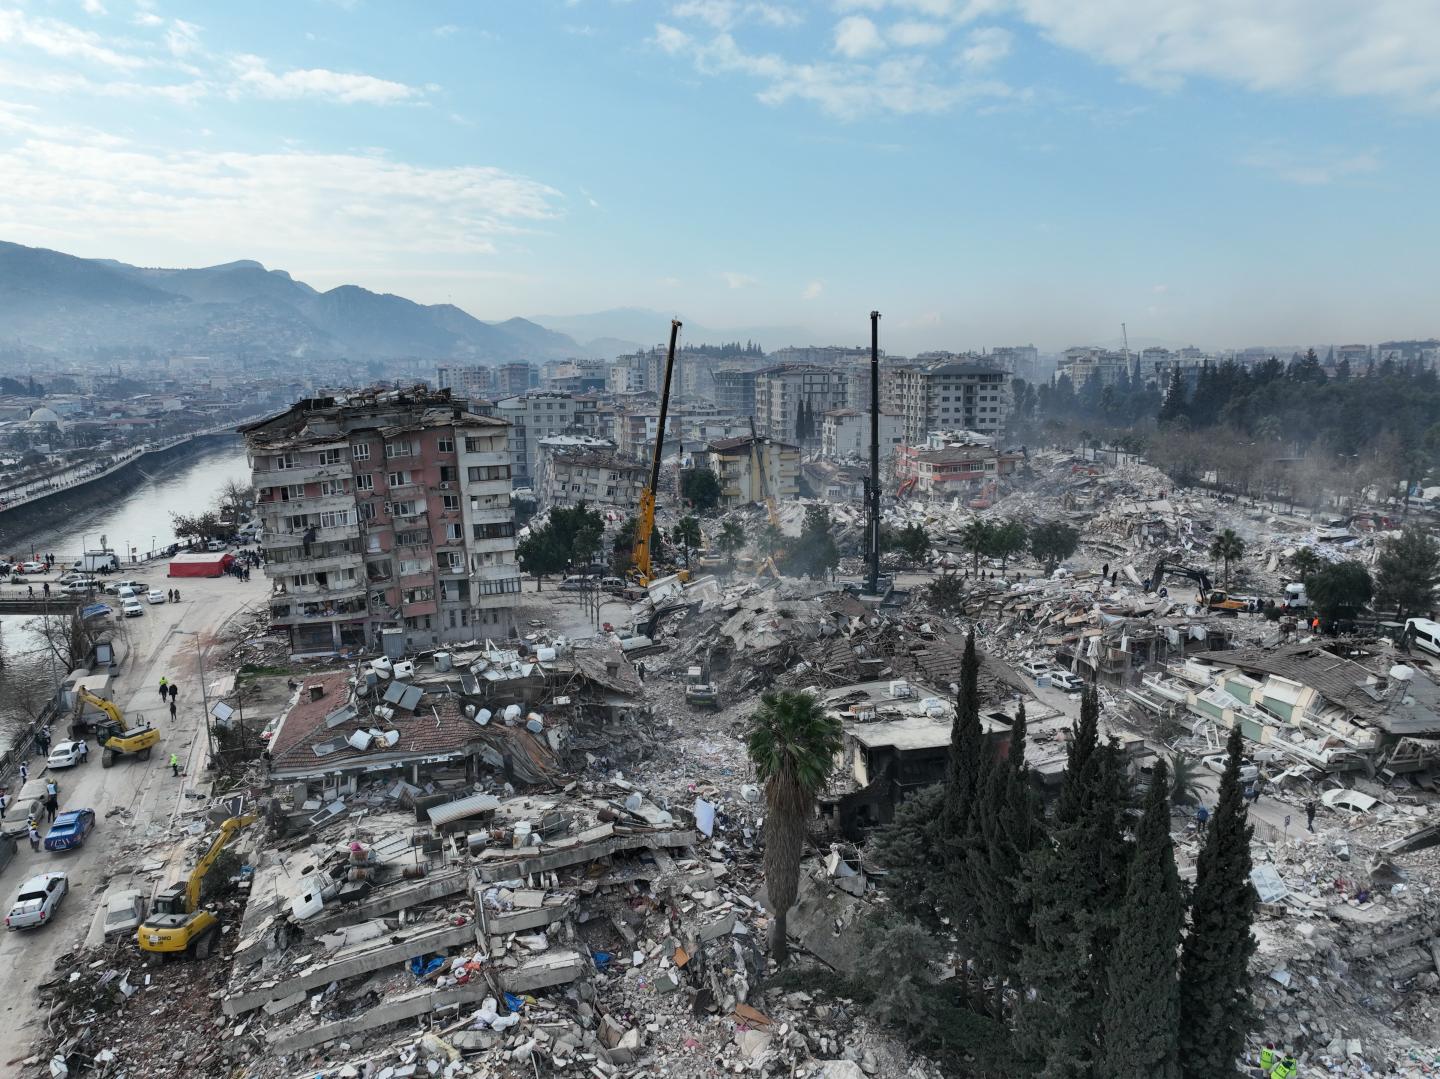 The aftermath of an earthquake in Turkey with many buildings toppled and cranes helping clear debris